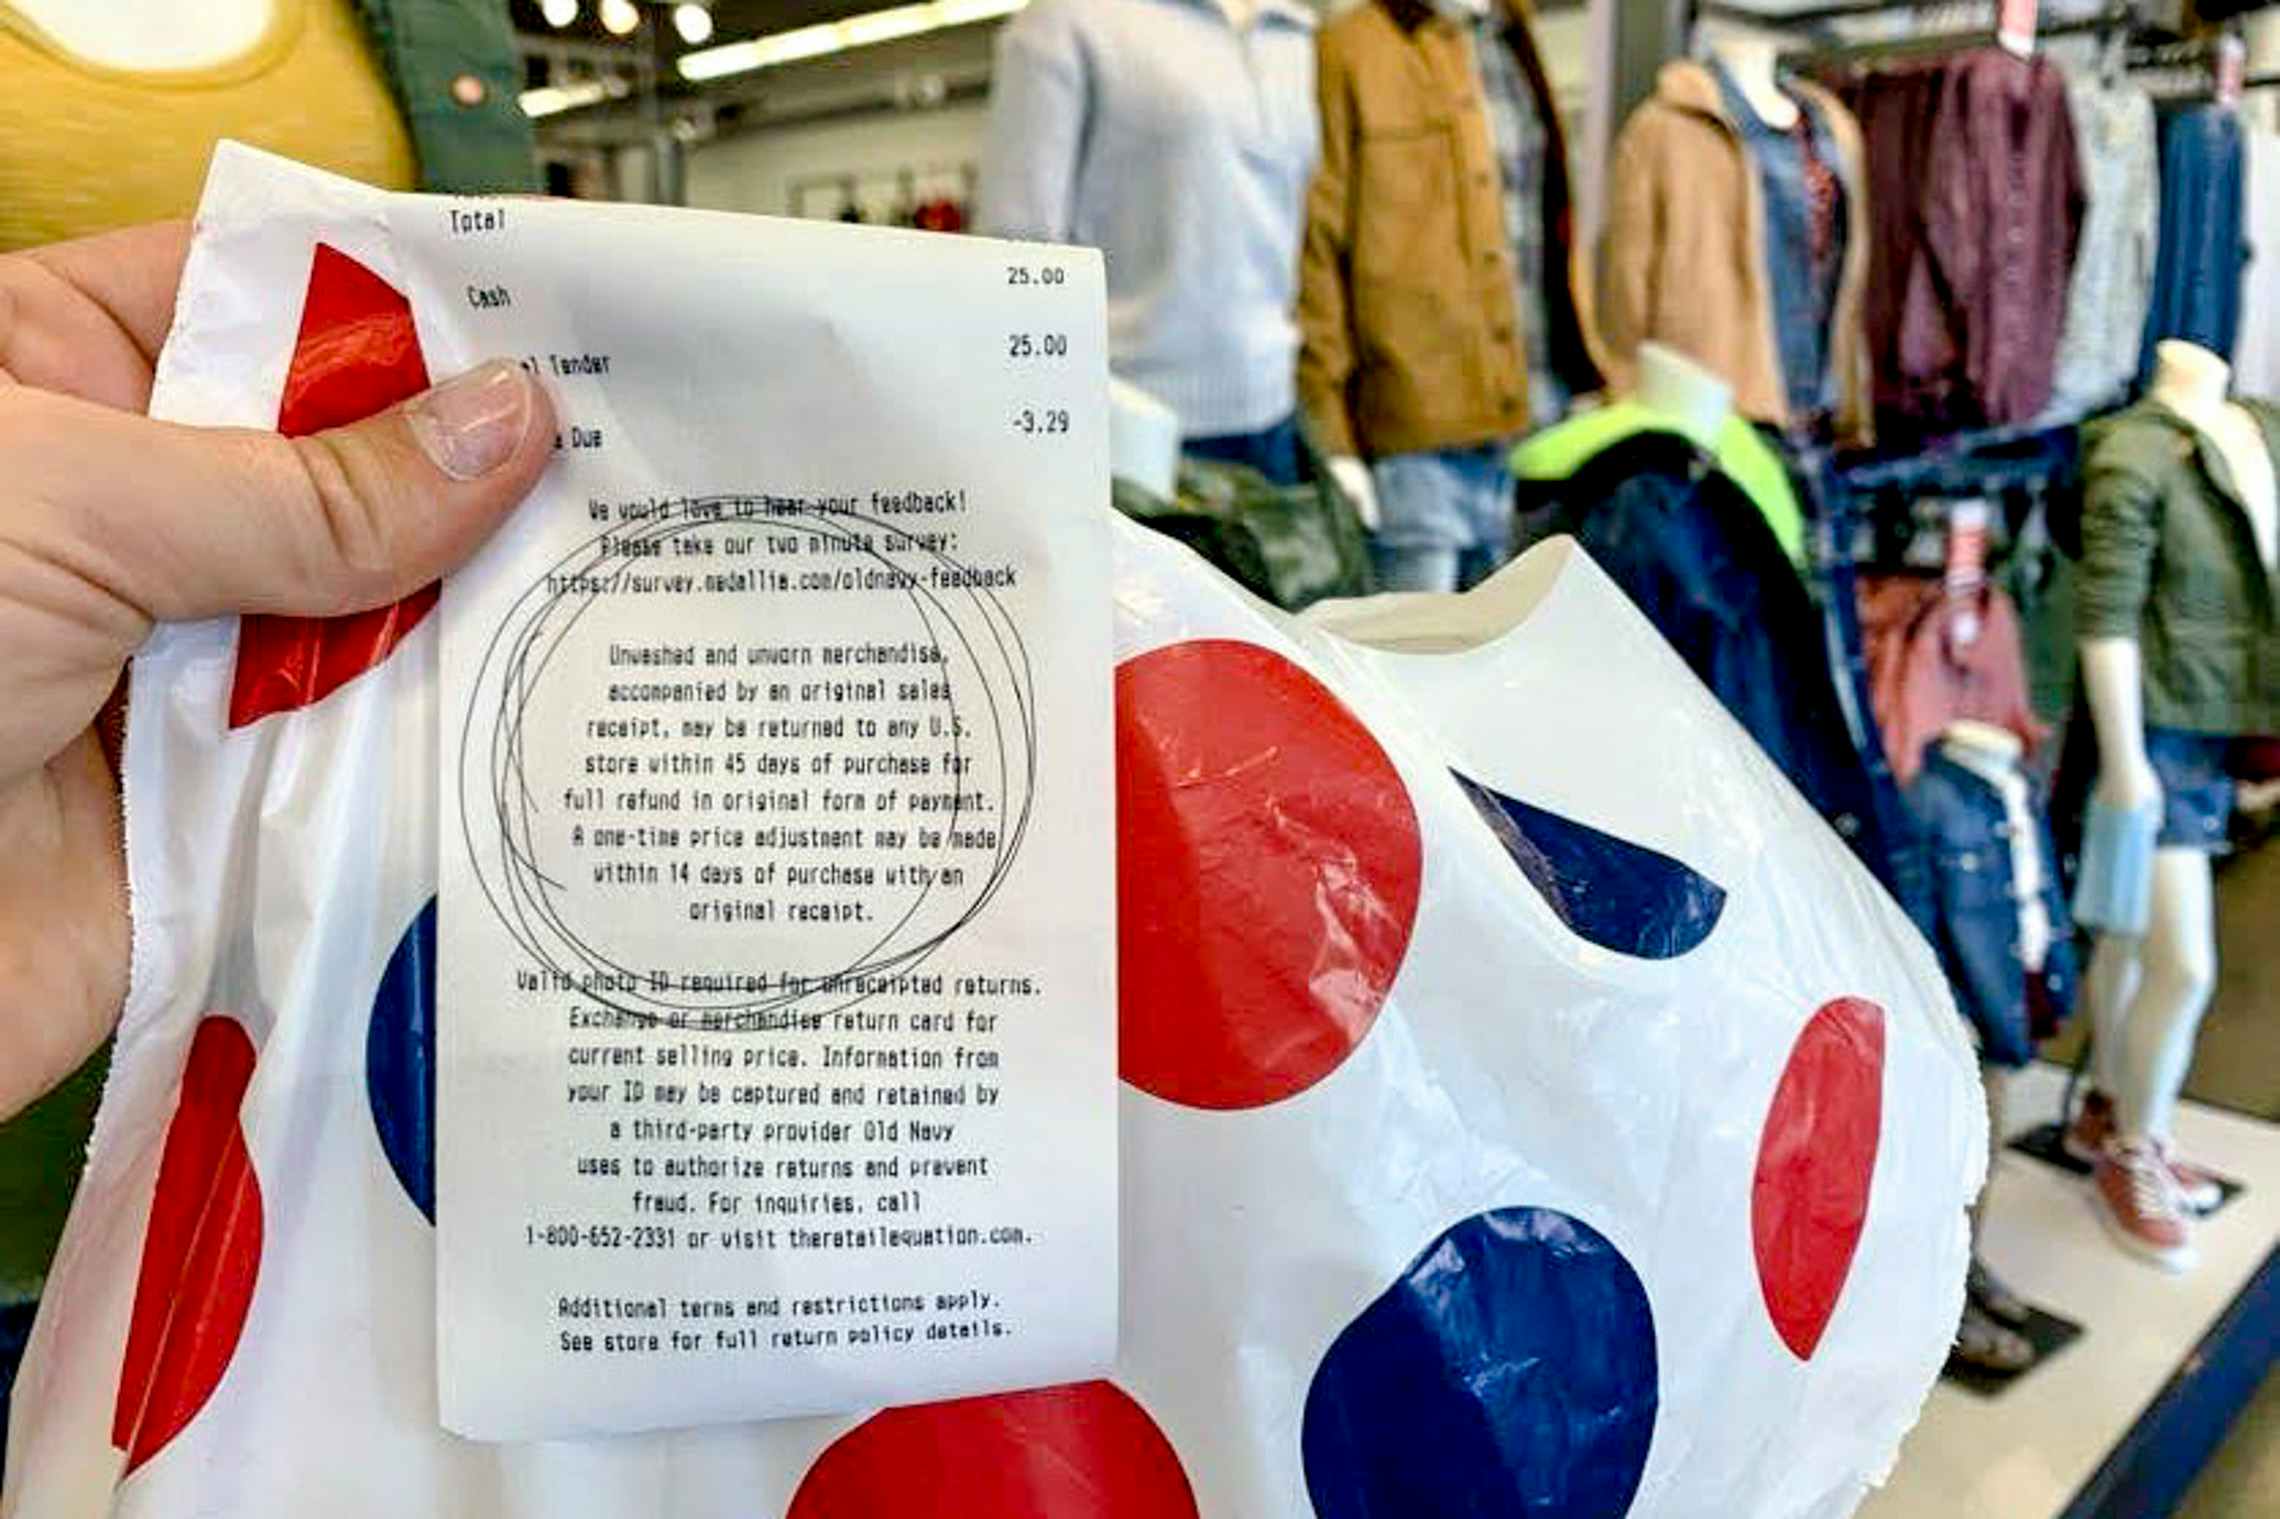 Receipt that has 45 day return policy circled held up with shopping bag inside old navy store